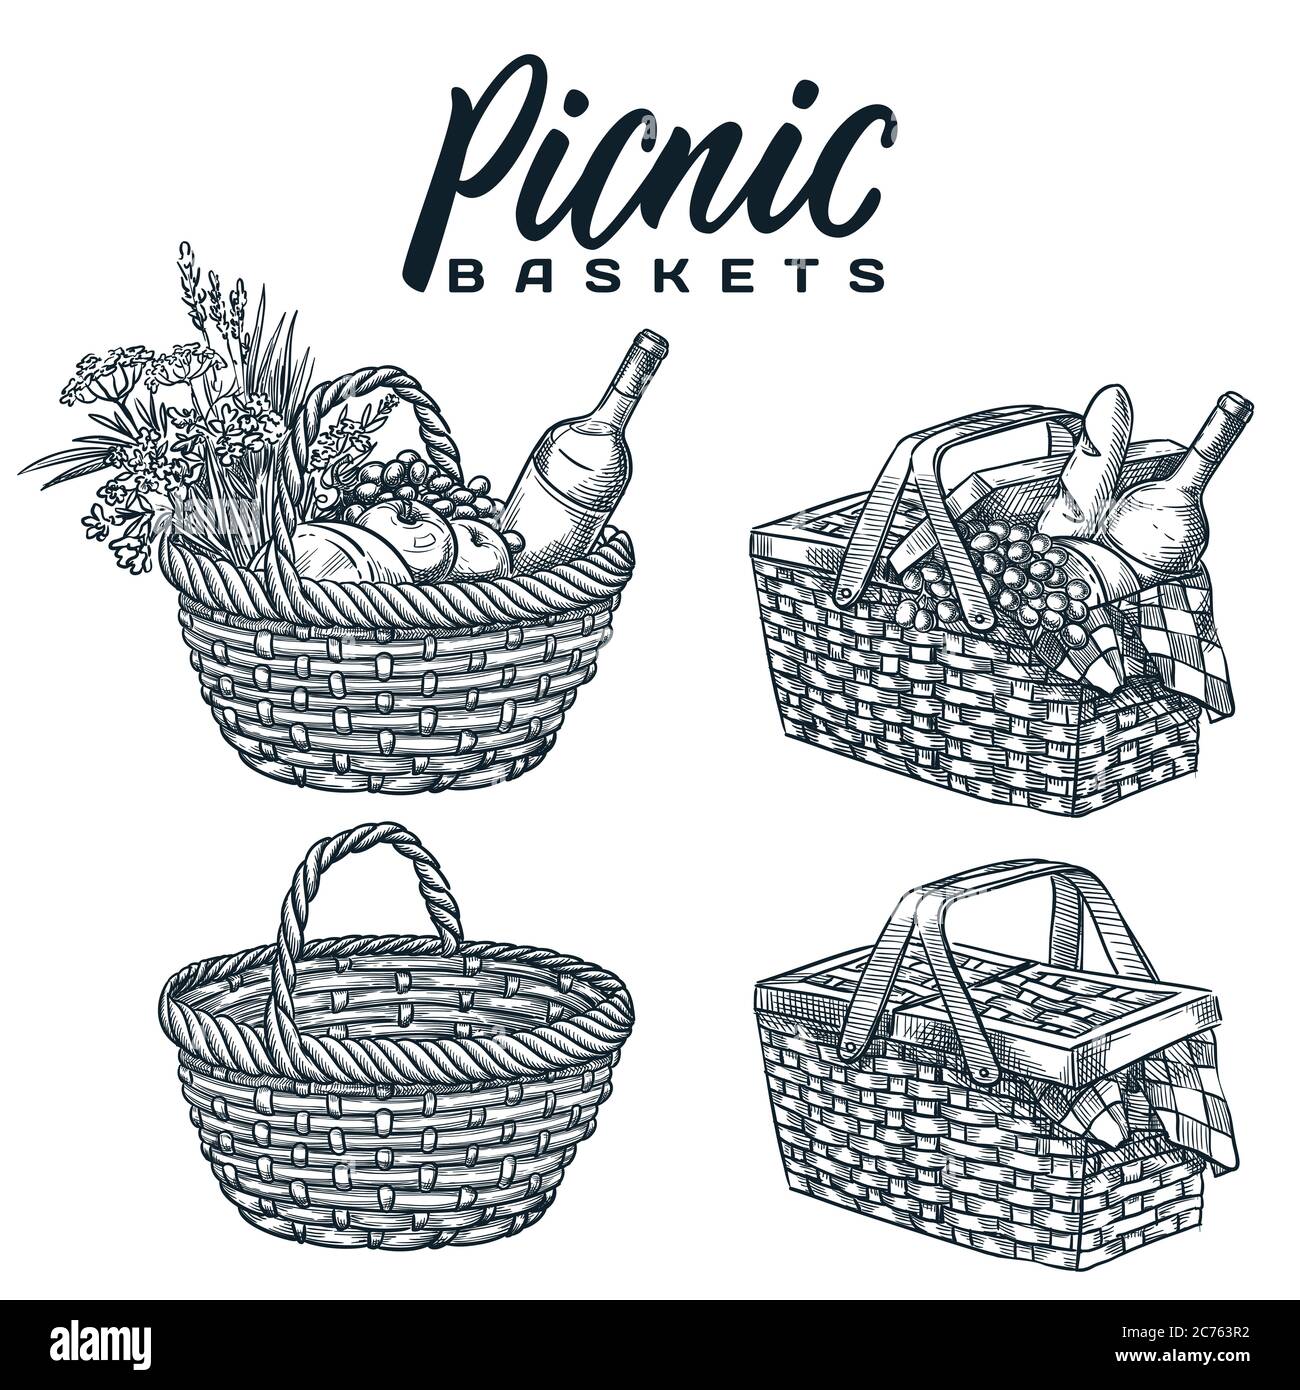 Picnic baskets set, isolated on white background. Vector hand drawn sketch illustration. Summer outdoor lunch, dinner design elements and calligraphy Stock Vector